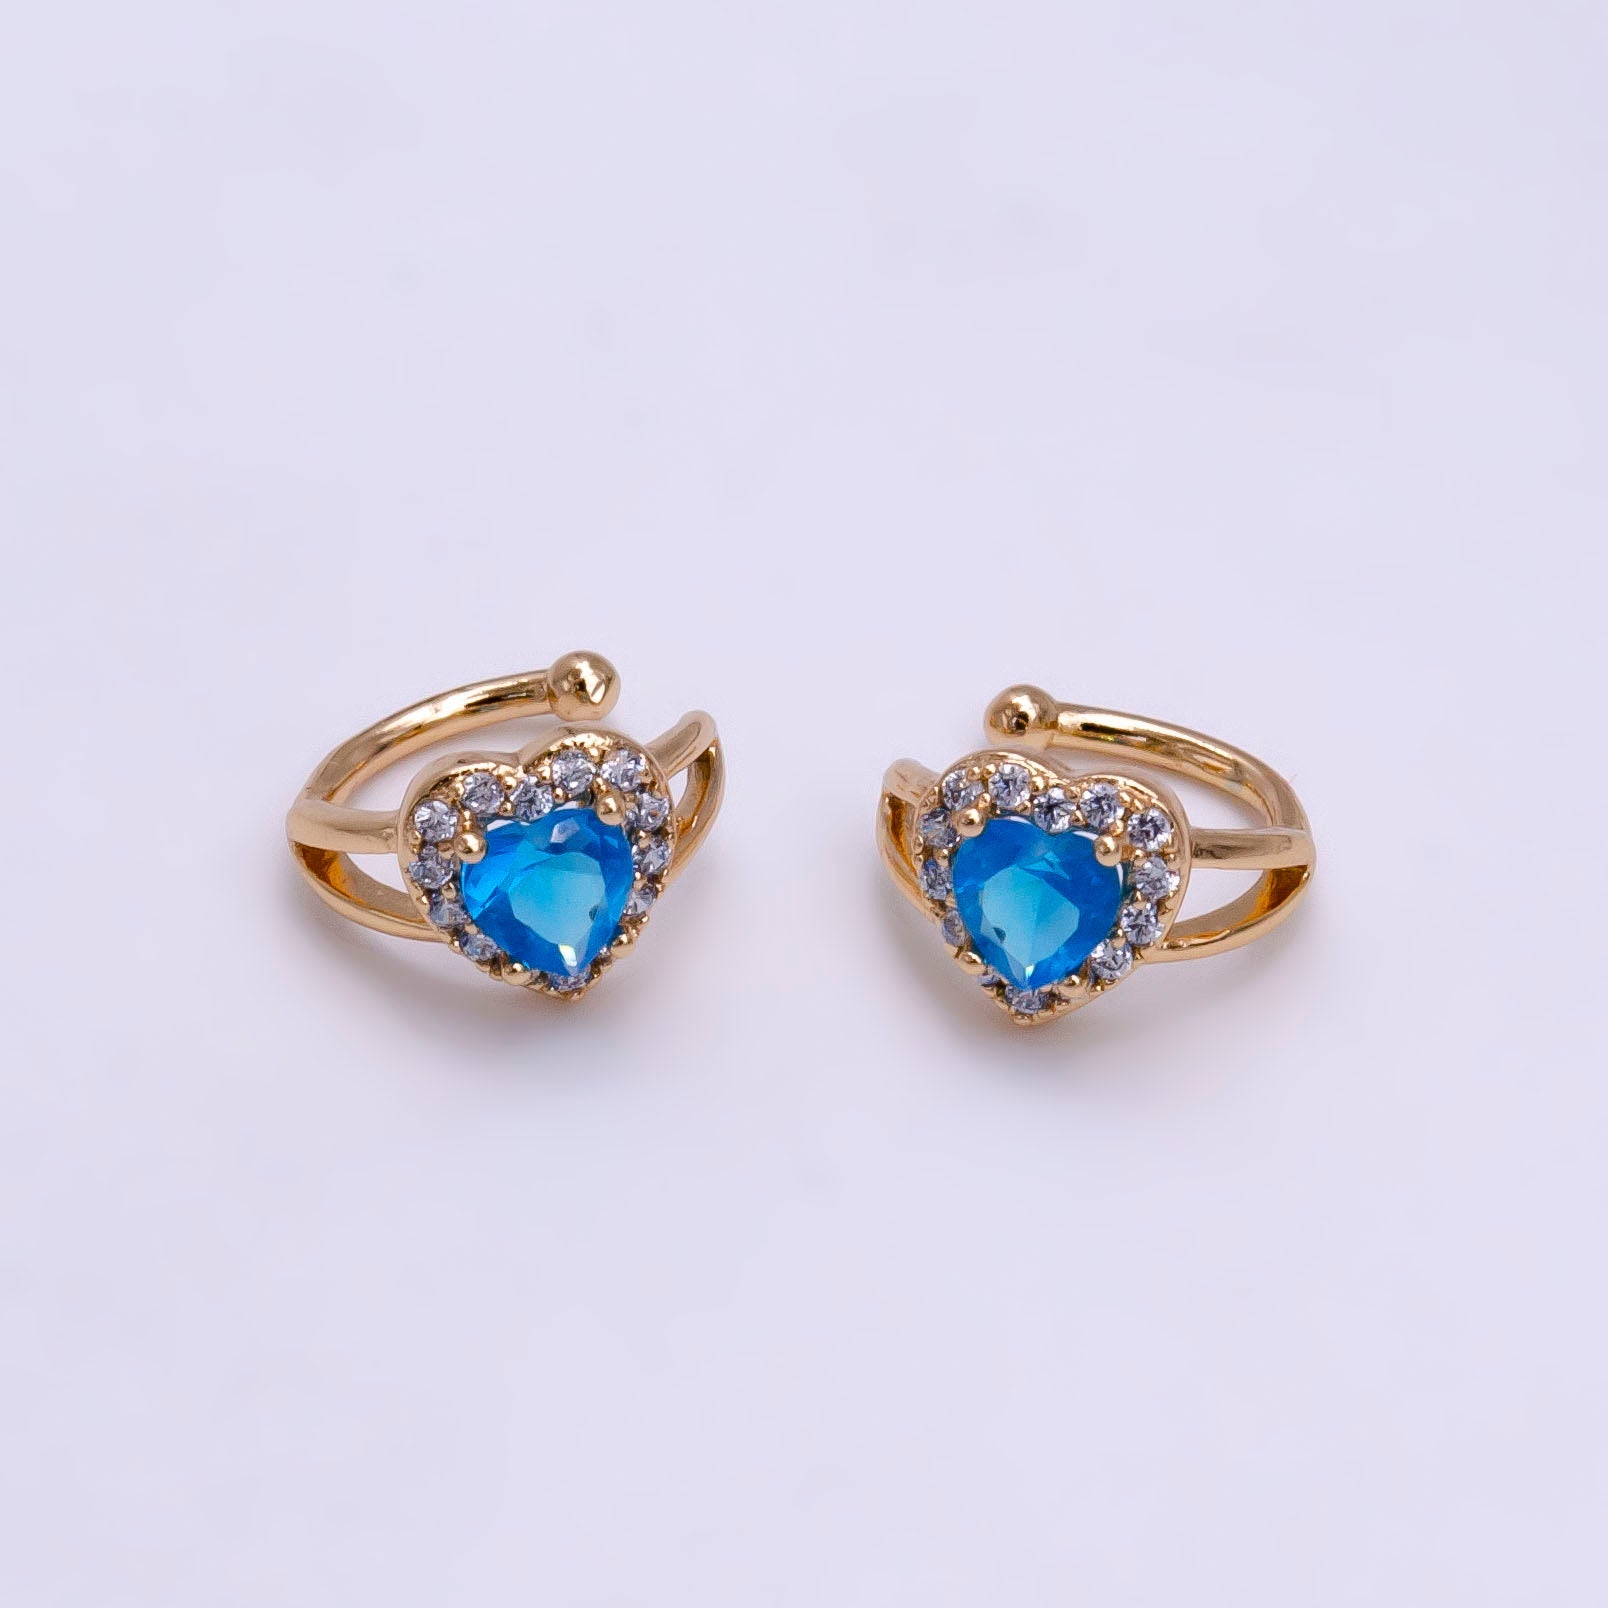 1x Blue Green Ear Cuffs for Non Pierced Ears Micro Pave Crystal Gold Clip on Conch Cuff Earrings for Women Girls, AI-062 AI-063.